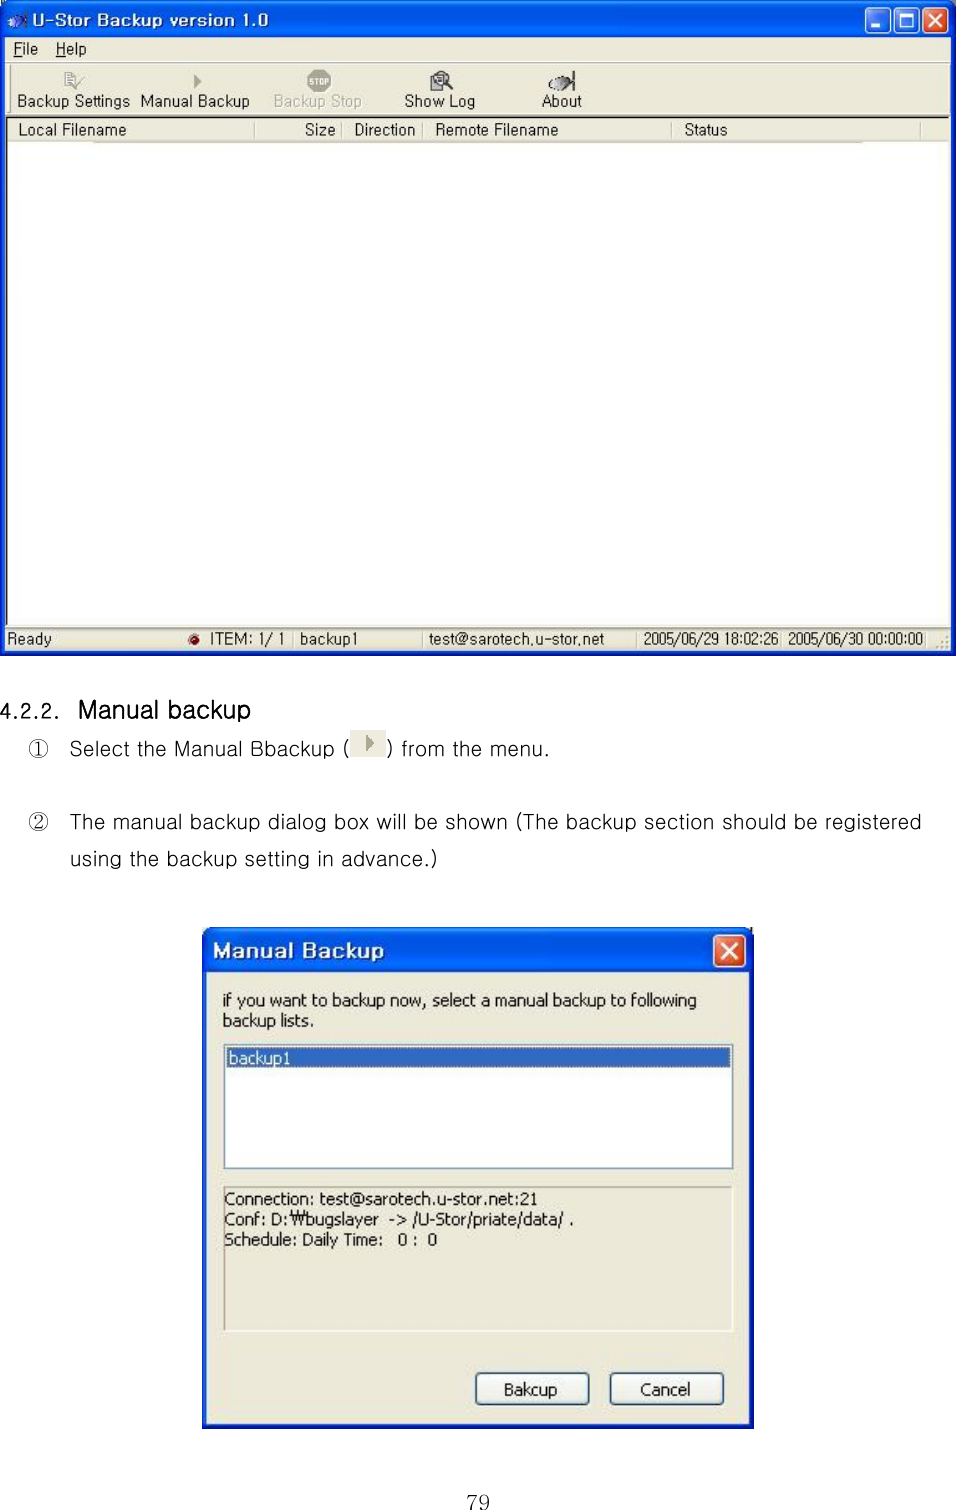  79 4.2.2.  Manual backup ①  Select the Manual Bbackup ( ) from the menu. ②  The manual backup dialog box will be shown (The backup section should be registered using the backup setting in advance.)  